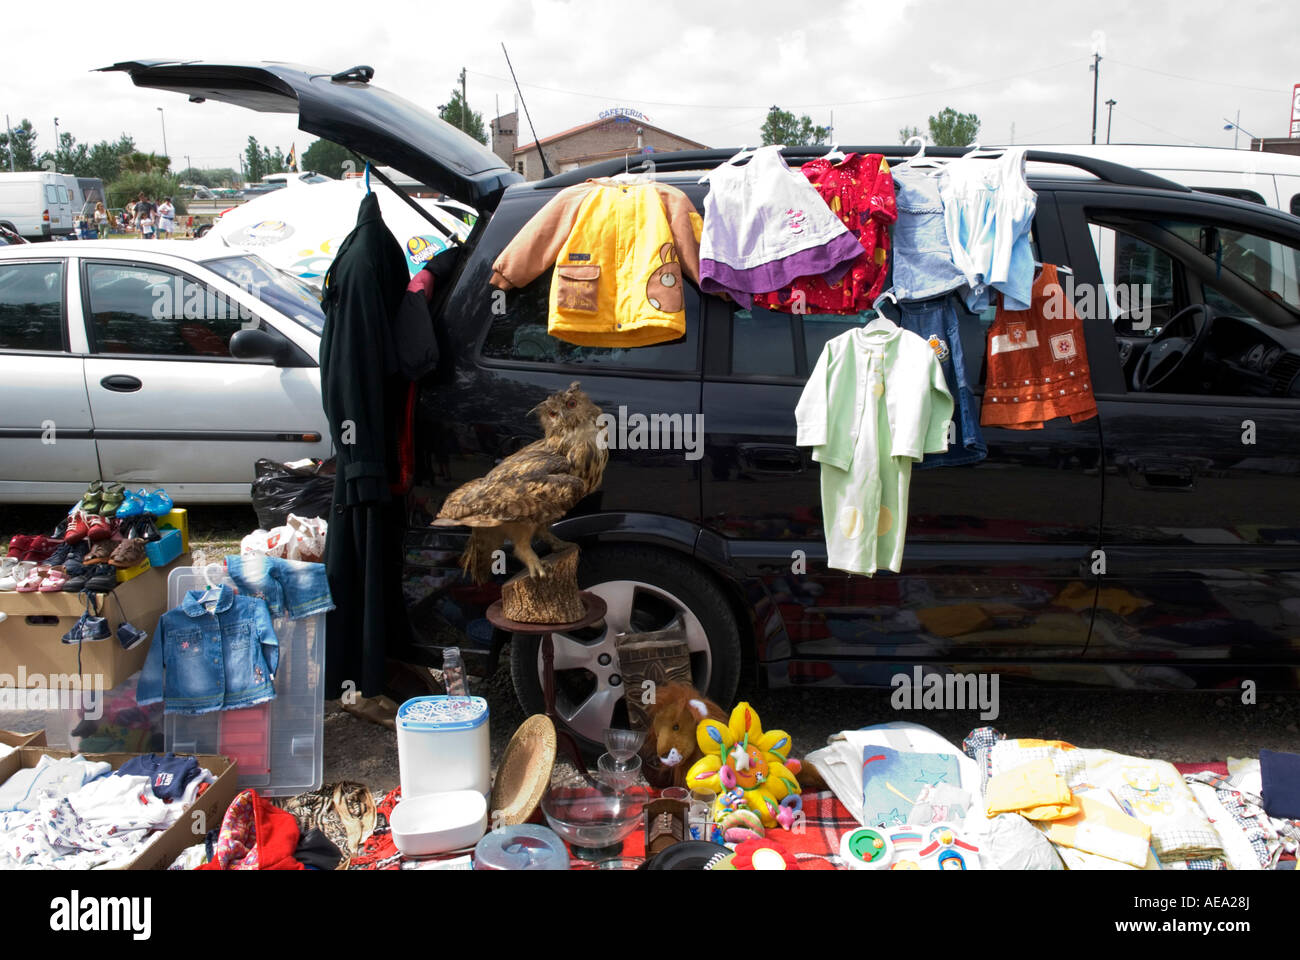 a stuffed eagle owl sits amongst a pile of junk in front of car at a french flea market Stock Photo